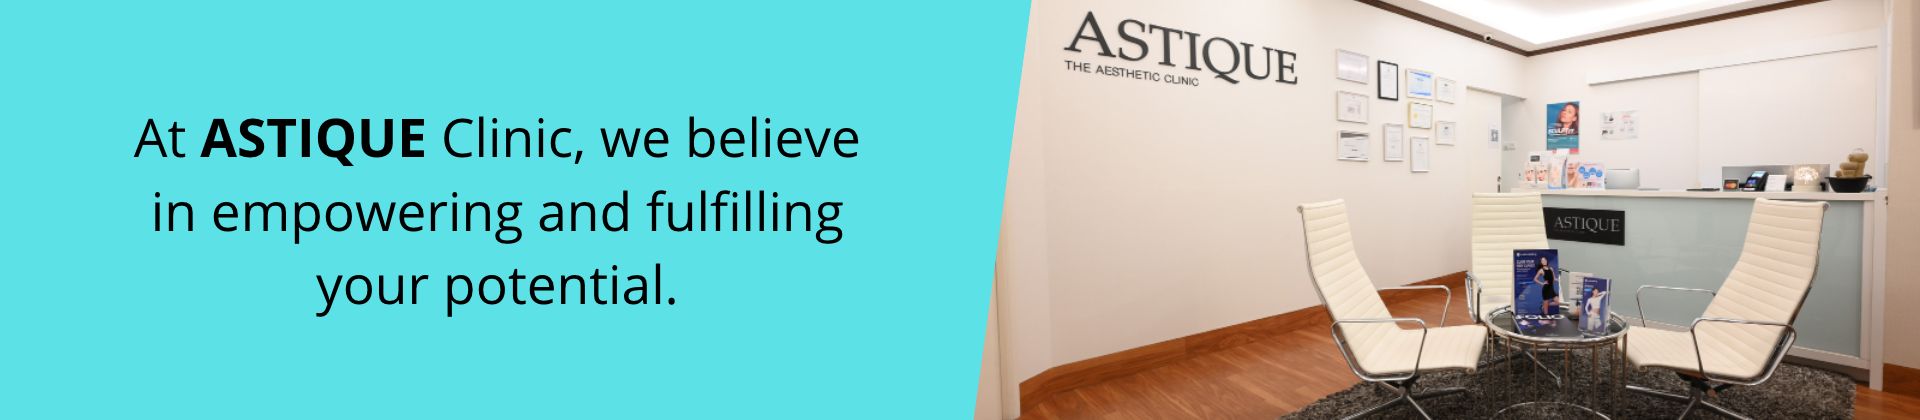 At Astique, We Believe in Empowering and Fulfilling Your Potential